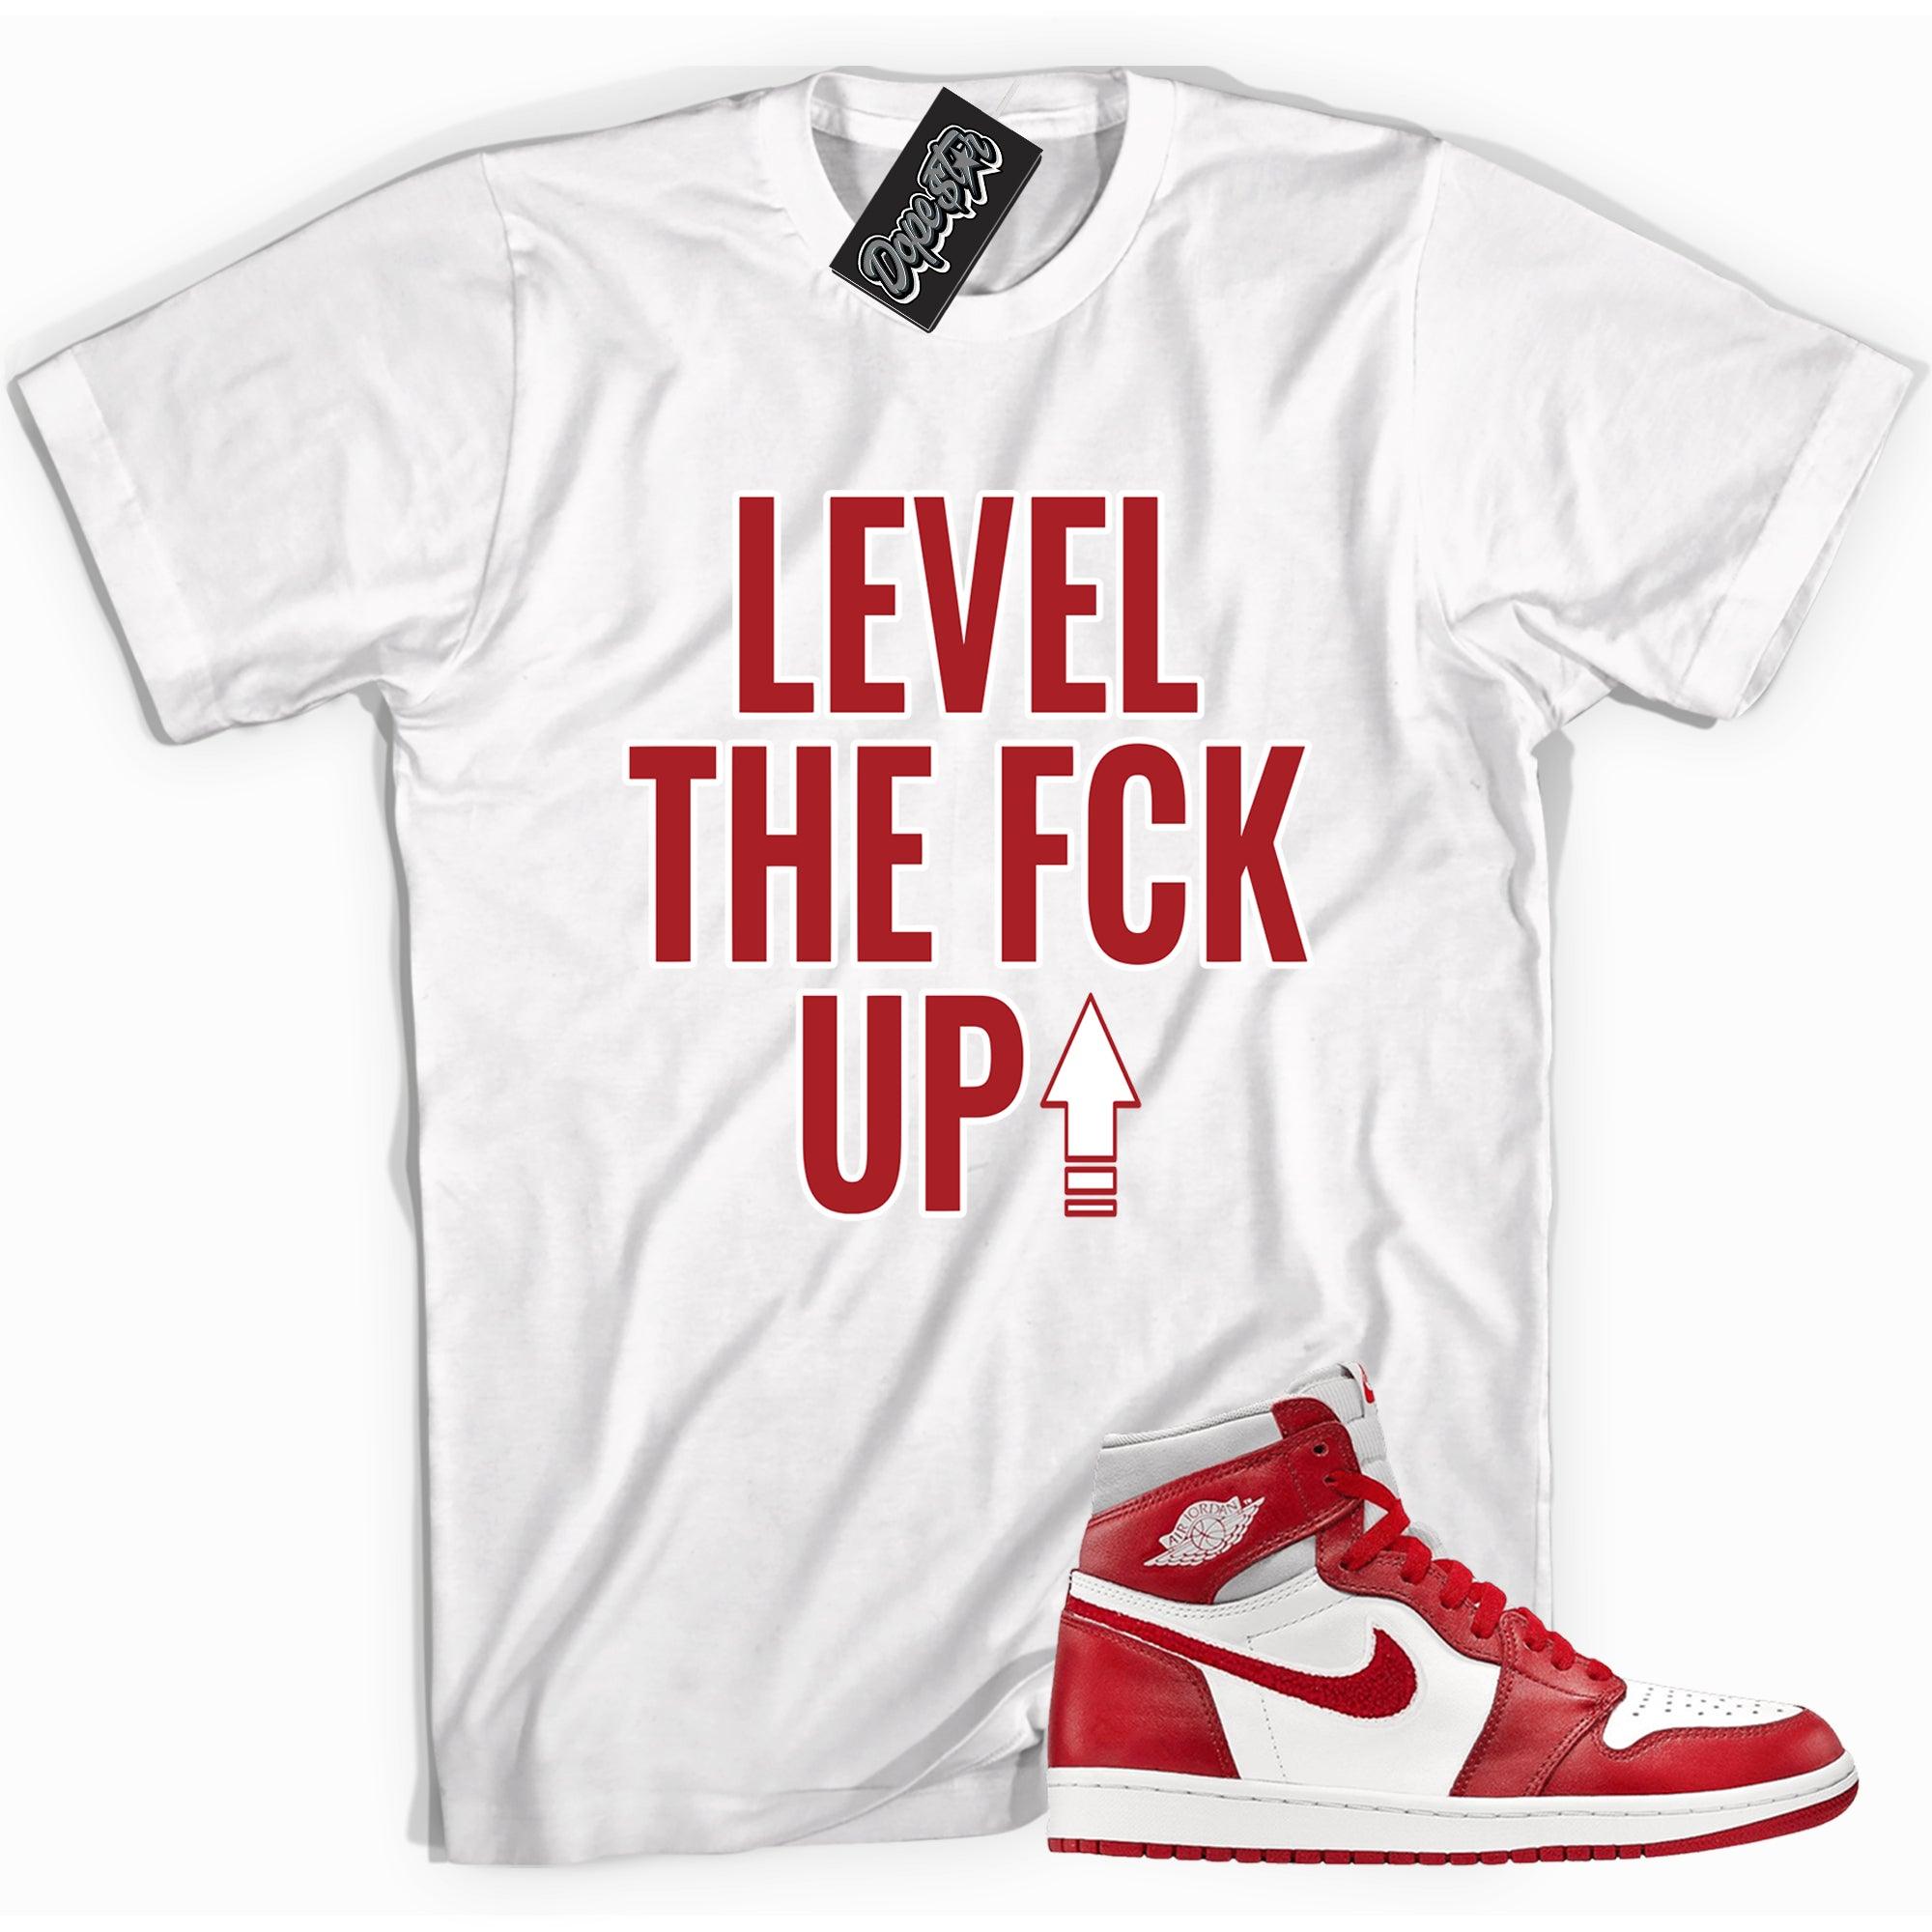 Cool white graphic tee with 'Level Up' print, that perfectly matches Air Jordan 1 High OG Newstalgia Chenille sneakers.